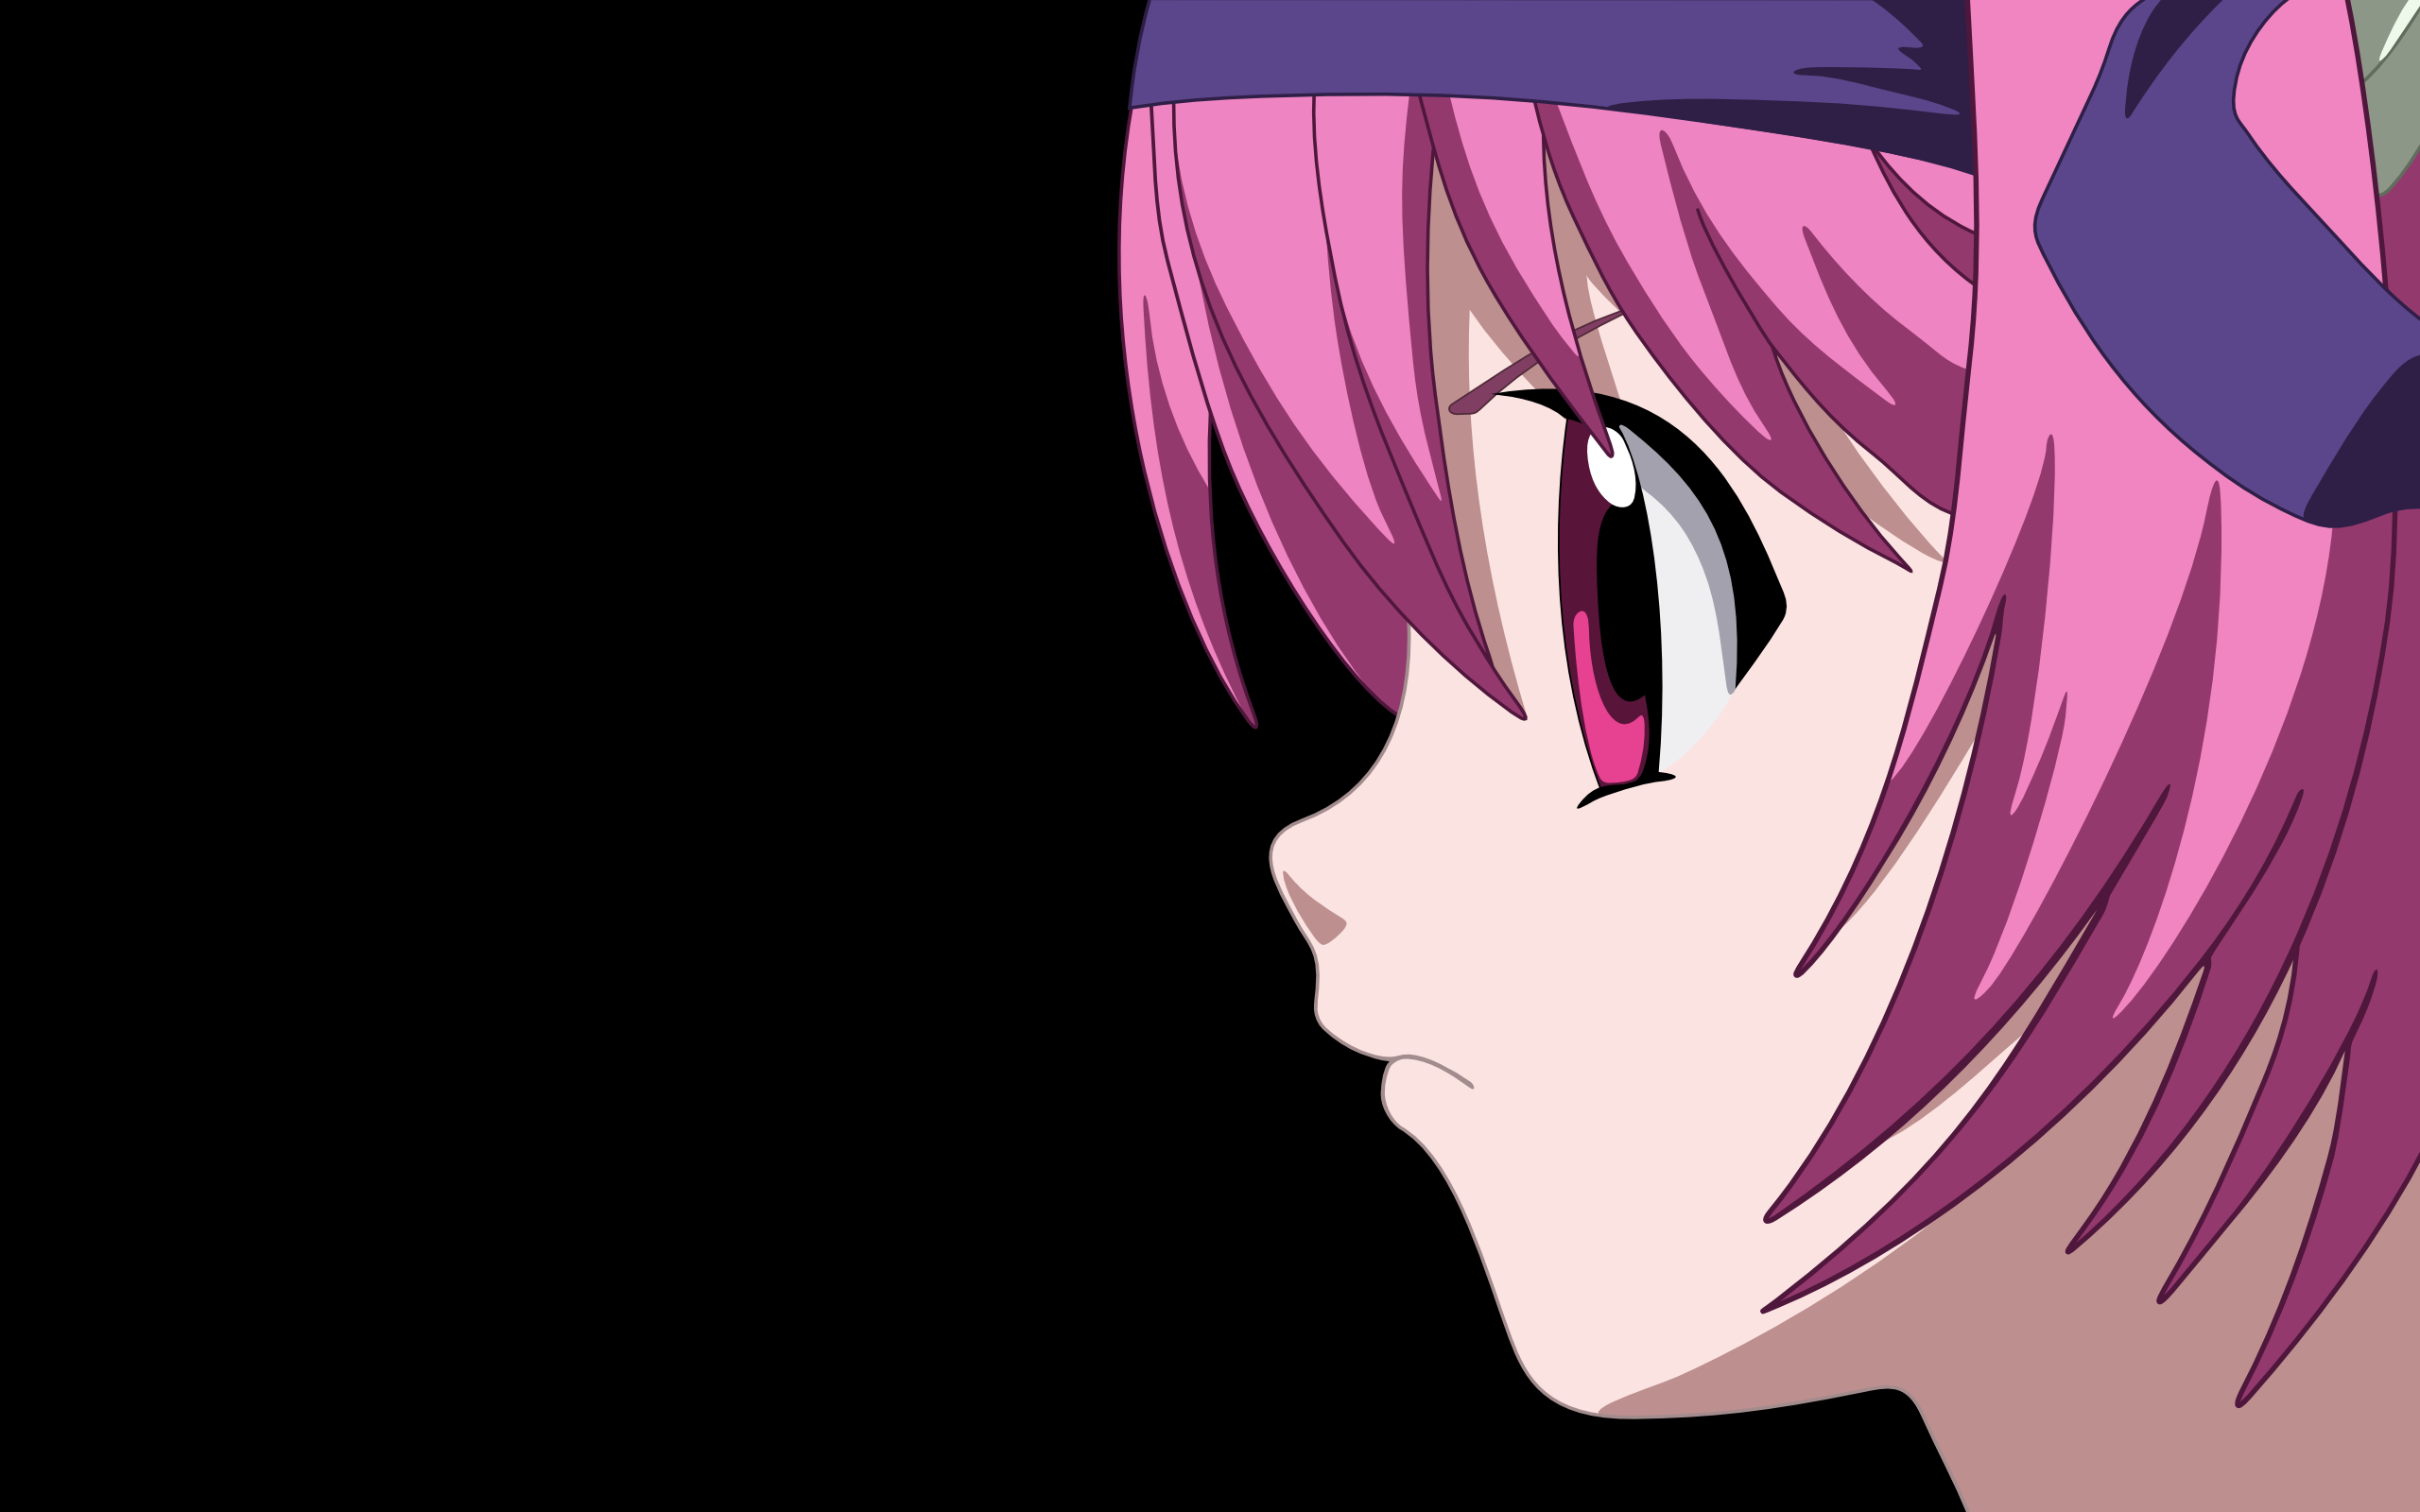 Elfen Lied character Nana in anime style.